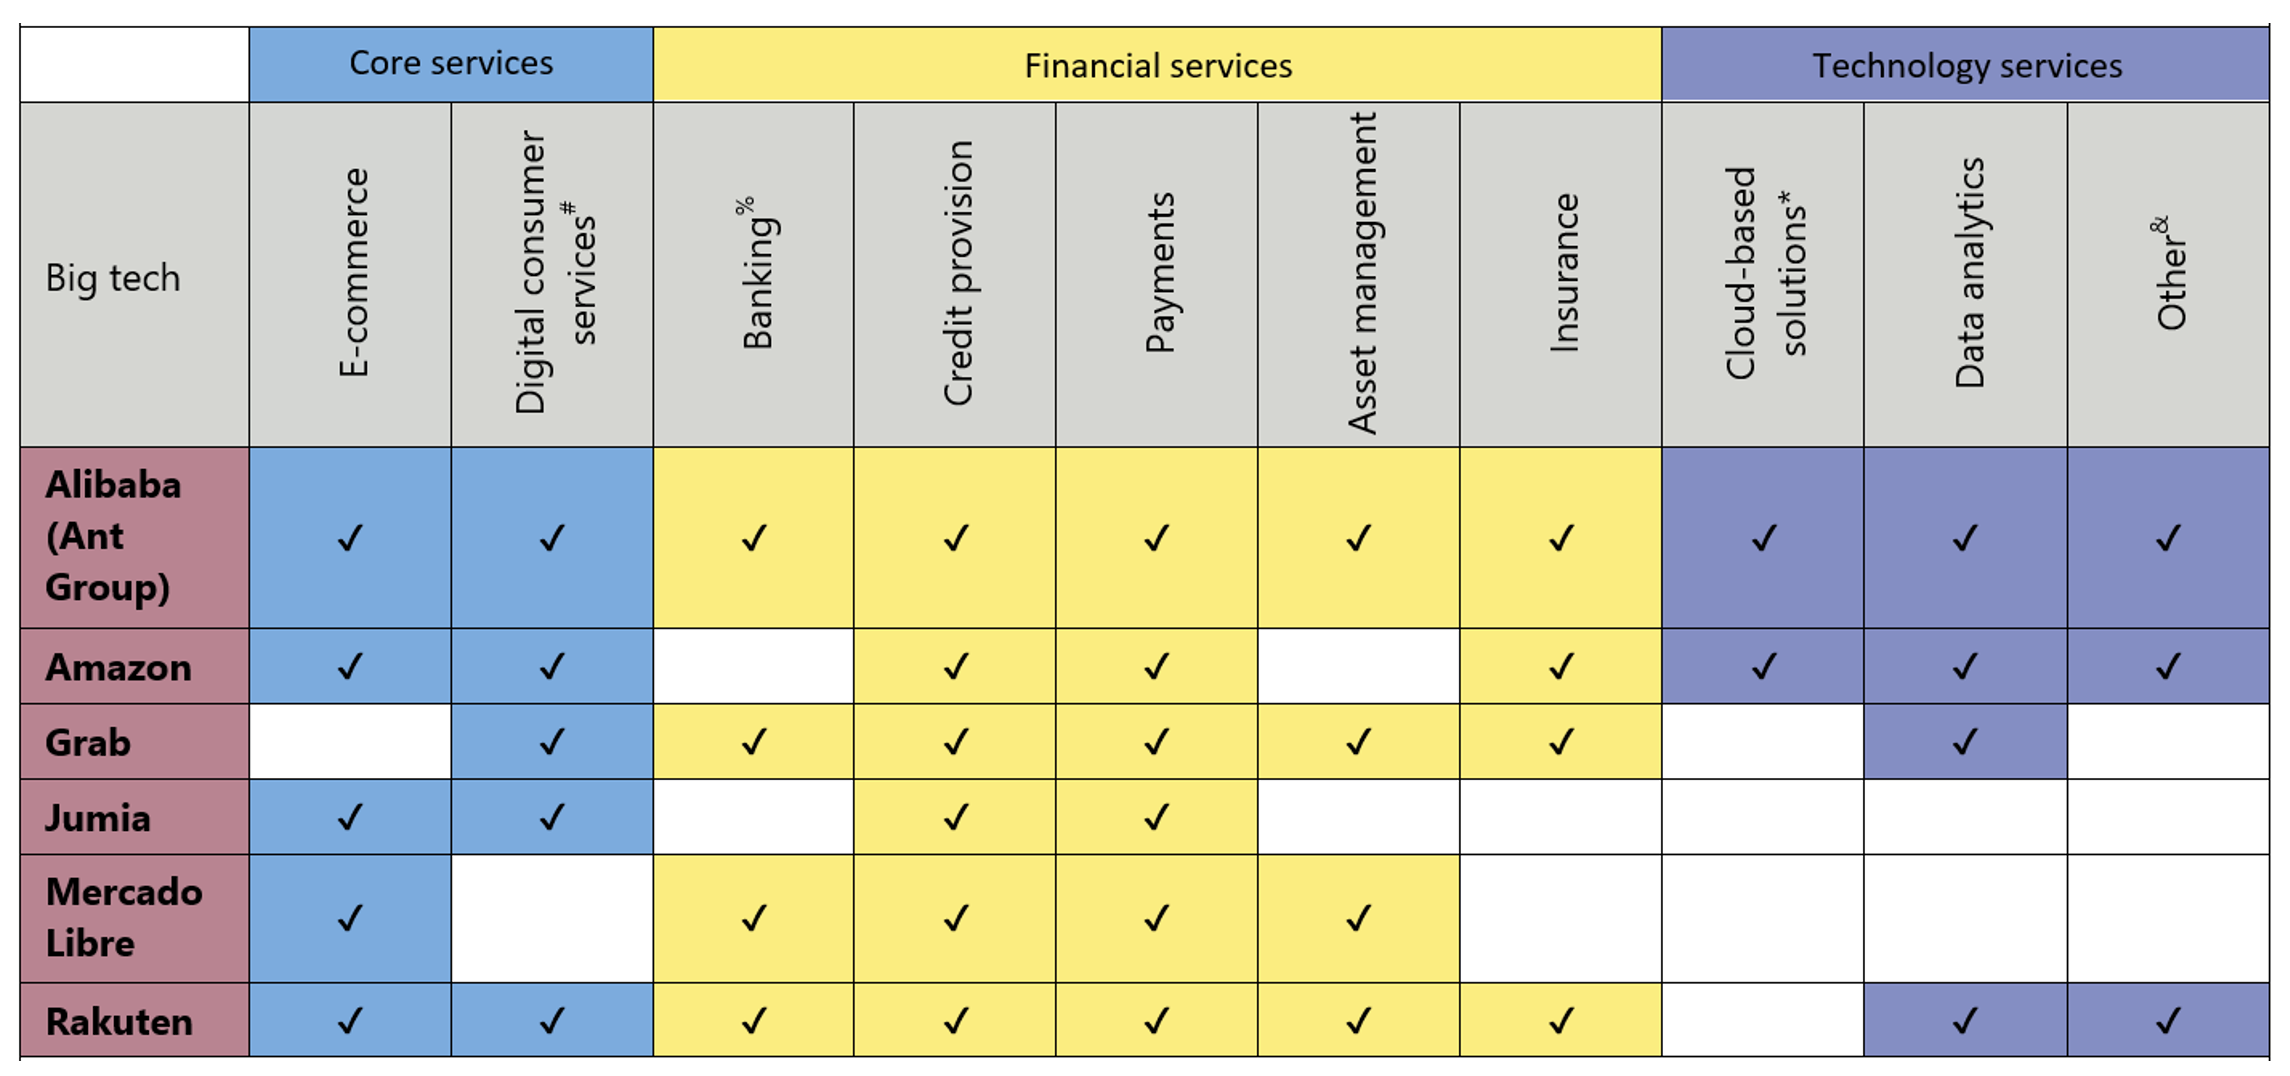 Table 2 Service offerings by big techs under analysis